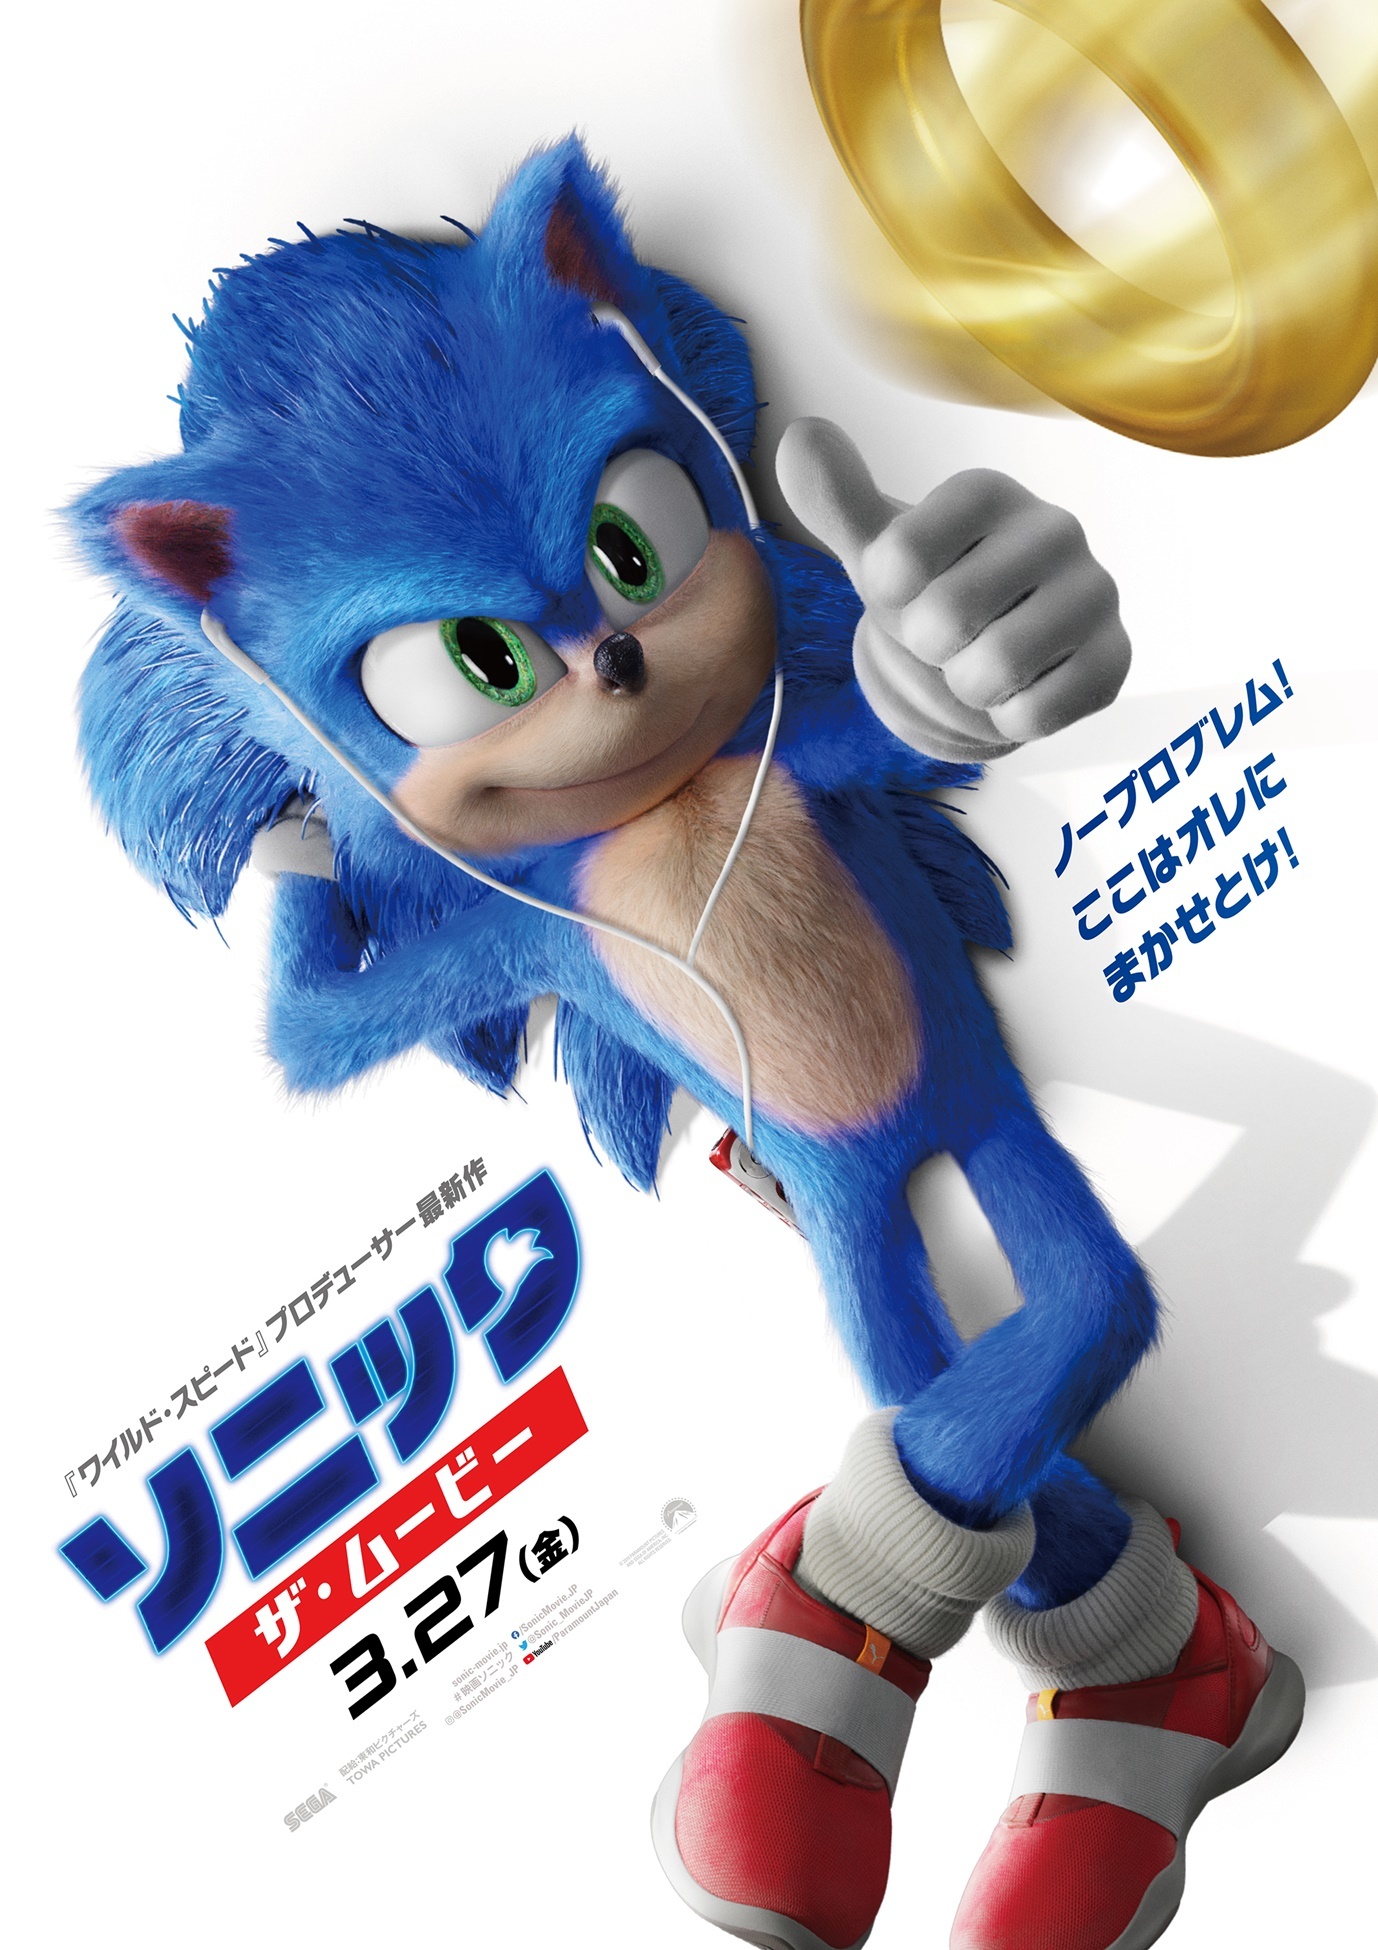  （C）2019 PARAMOUNT PICTURES AND SEGA OF AMERICA, INC. ALL RIGHTS RESERVED.